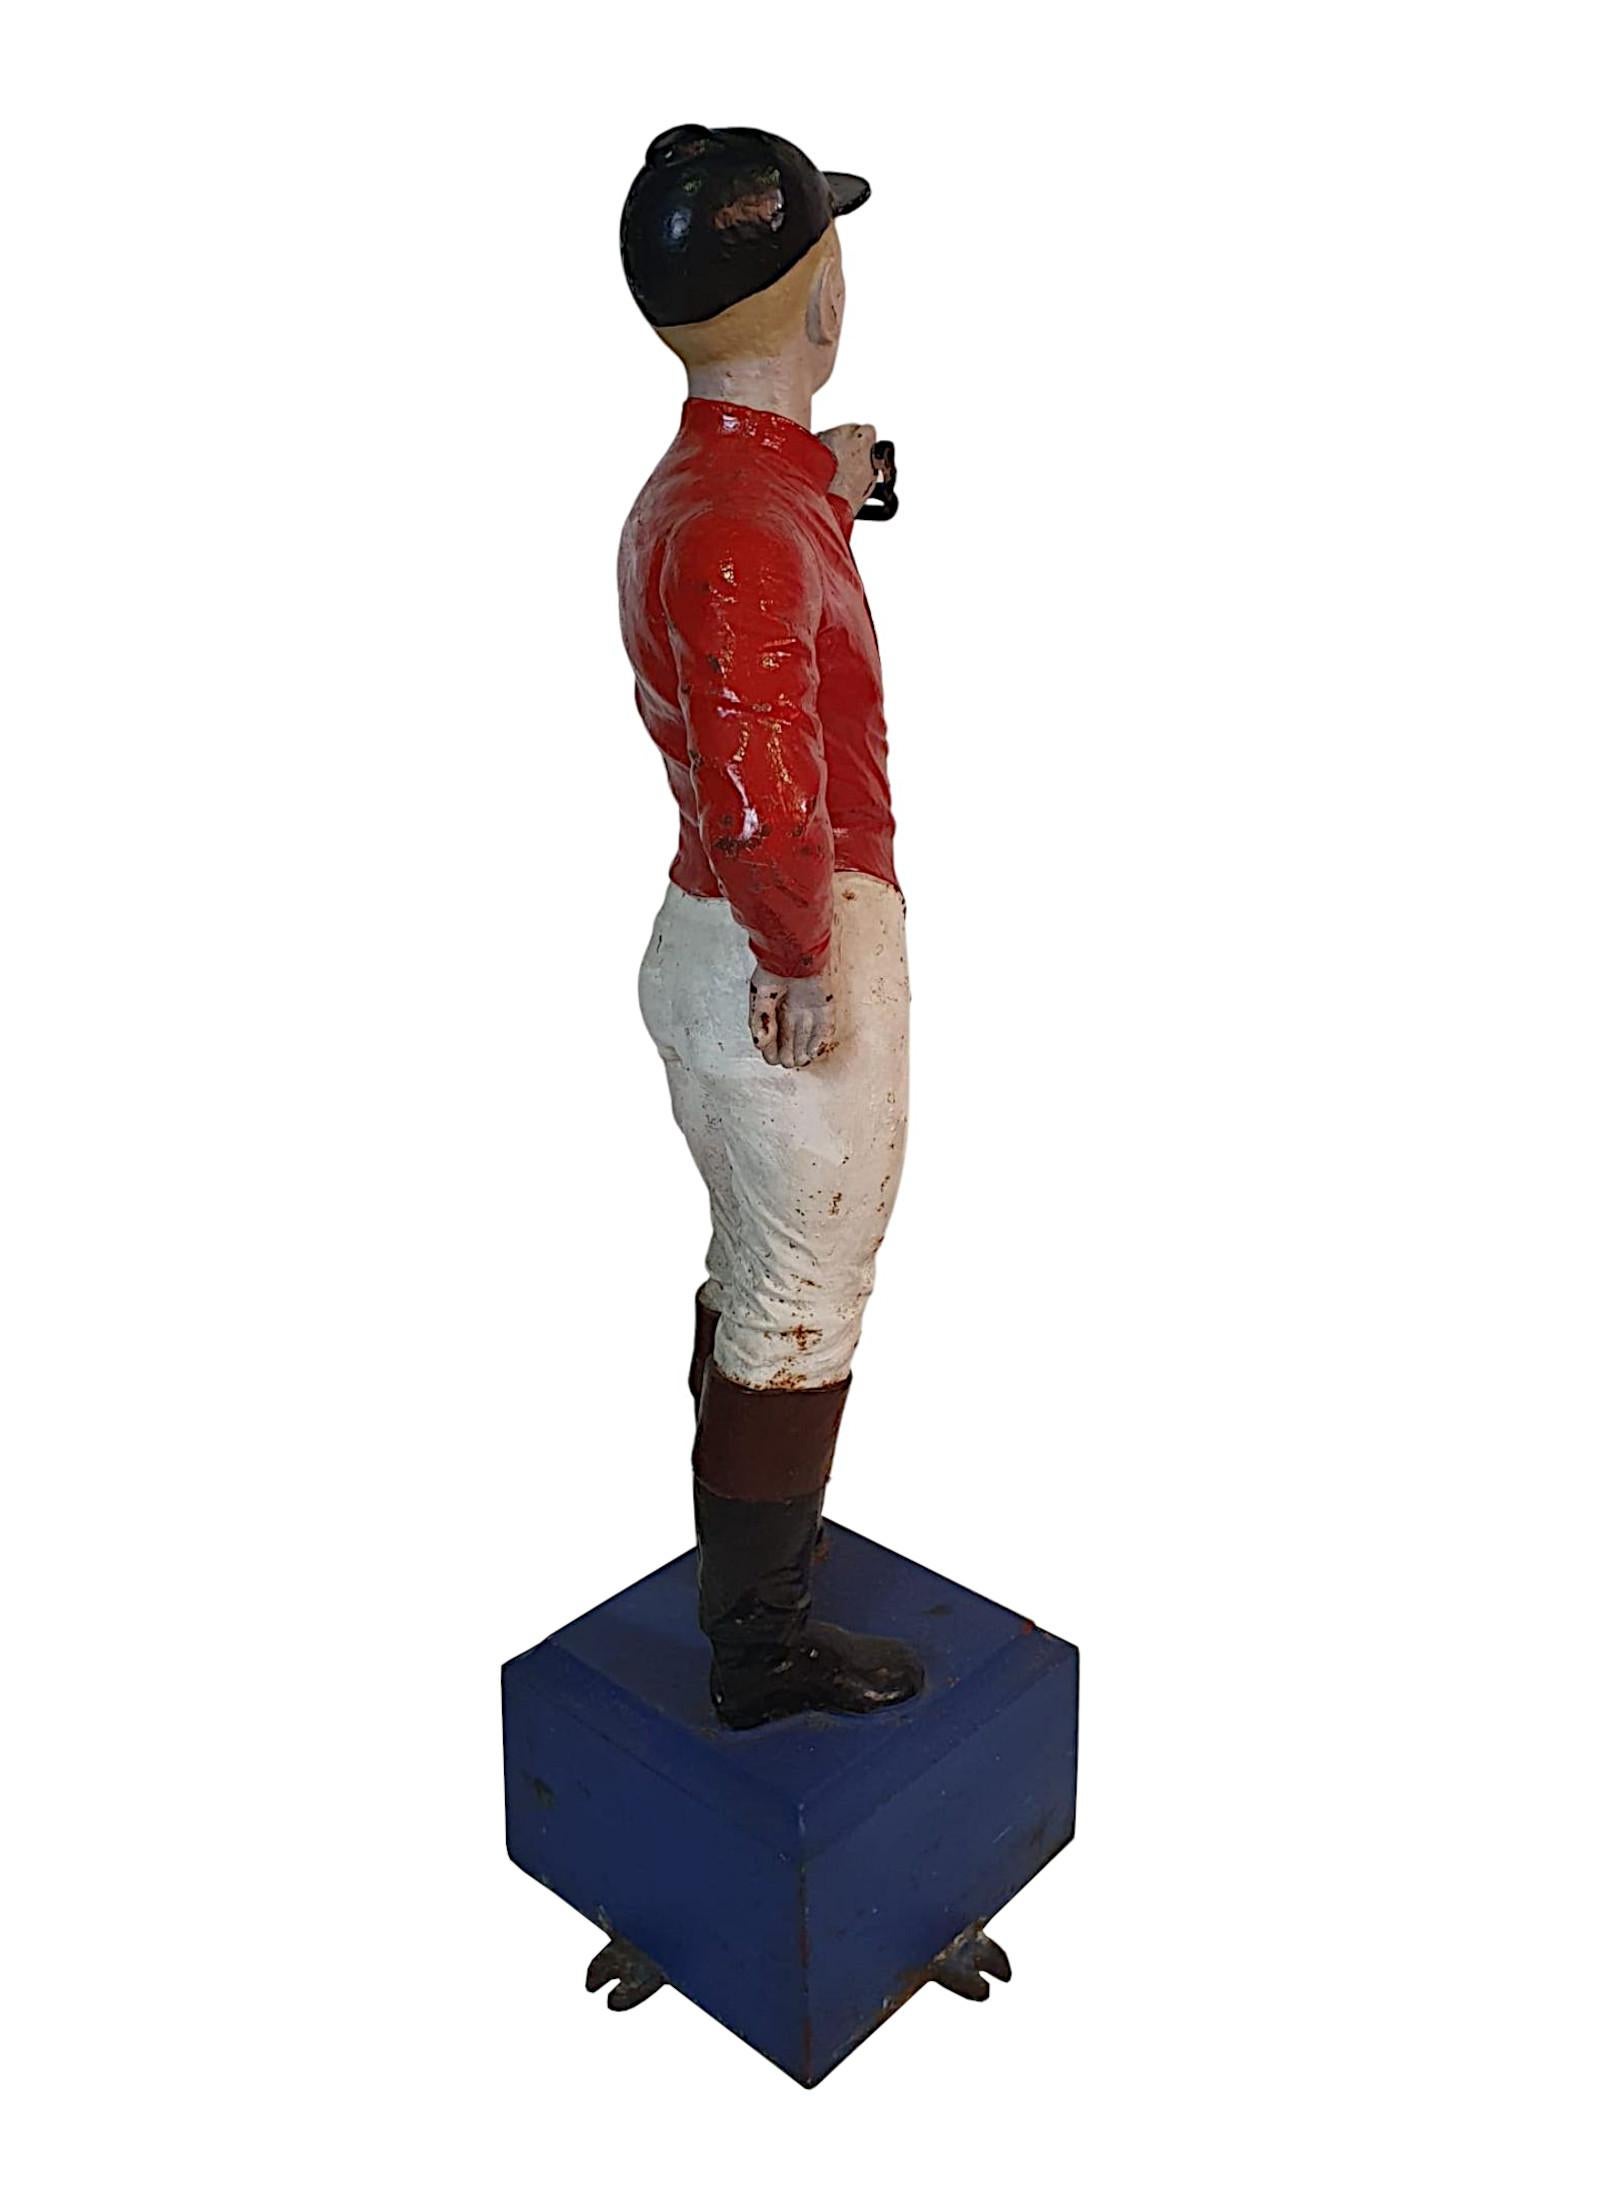 A very rare 19th century cast iron equine hitching post in the form of a jock-ey. The jockey is classically dressed in the 19th century riding attire, com-prising of a black riding hat, red jacket and cream jodhpurs. The jockey is poised on a